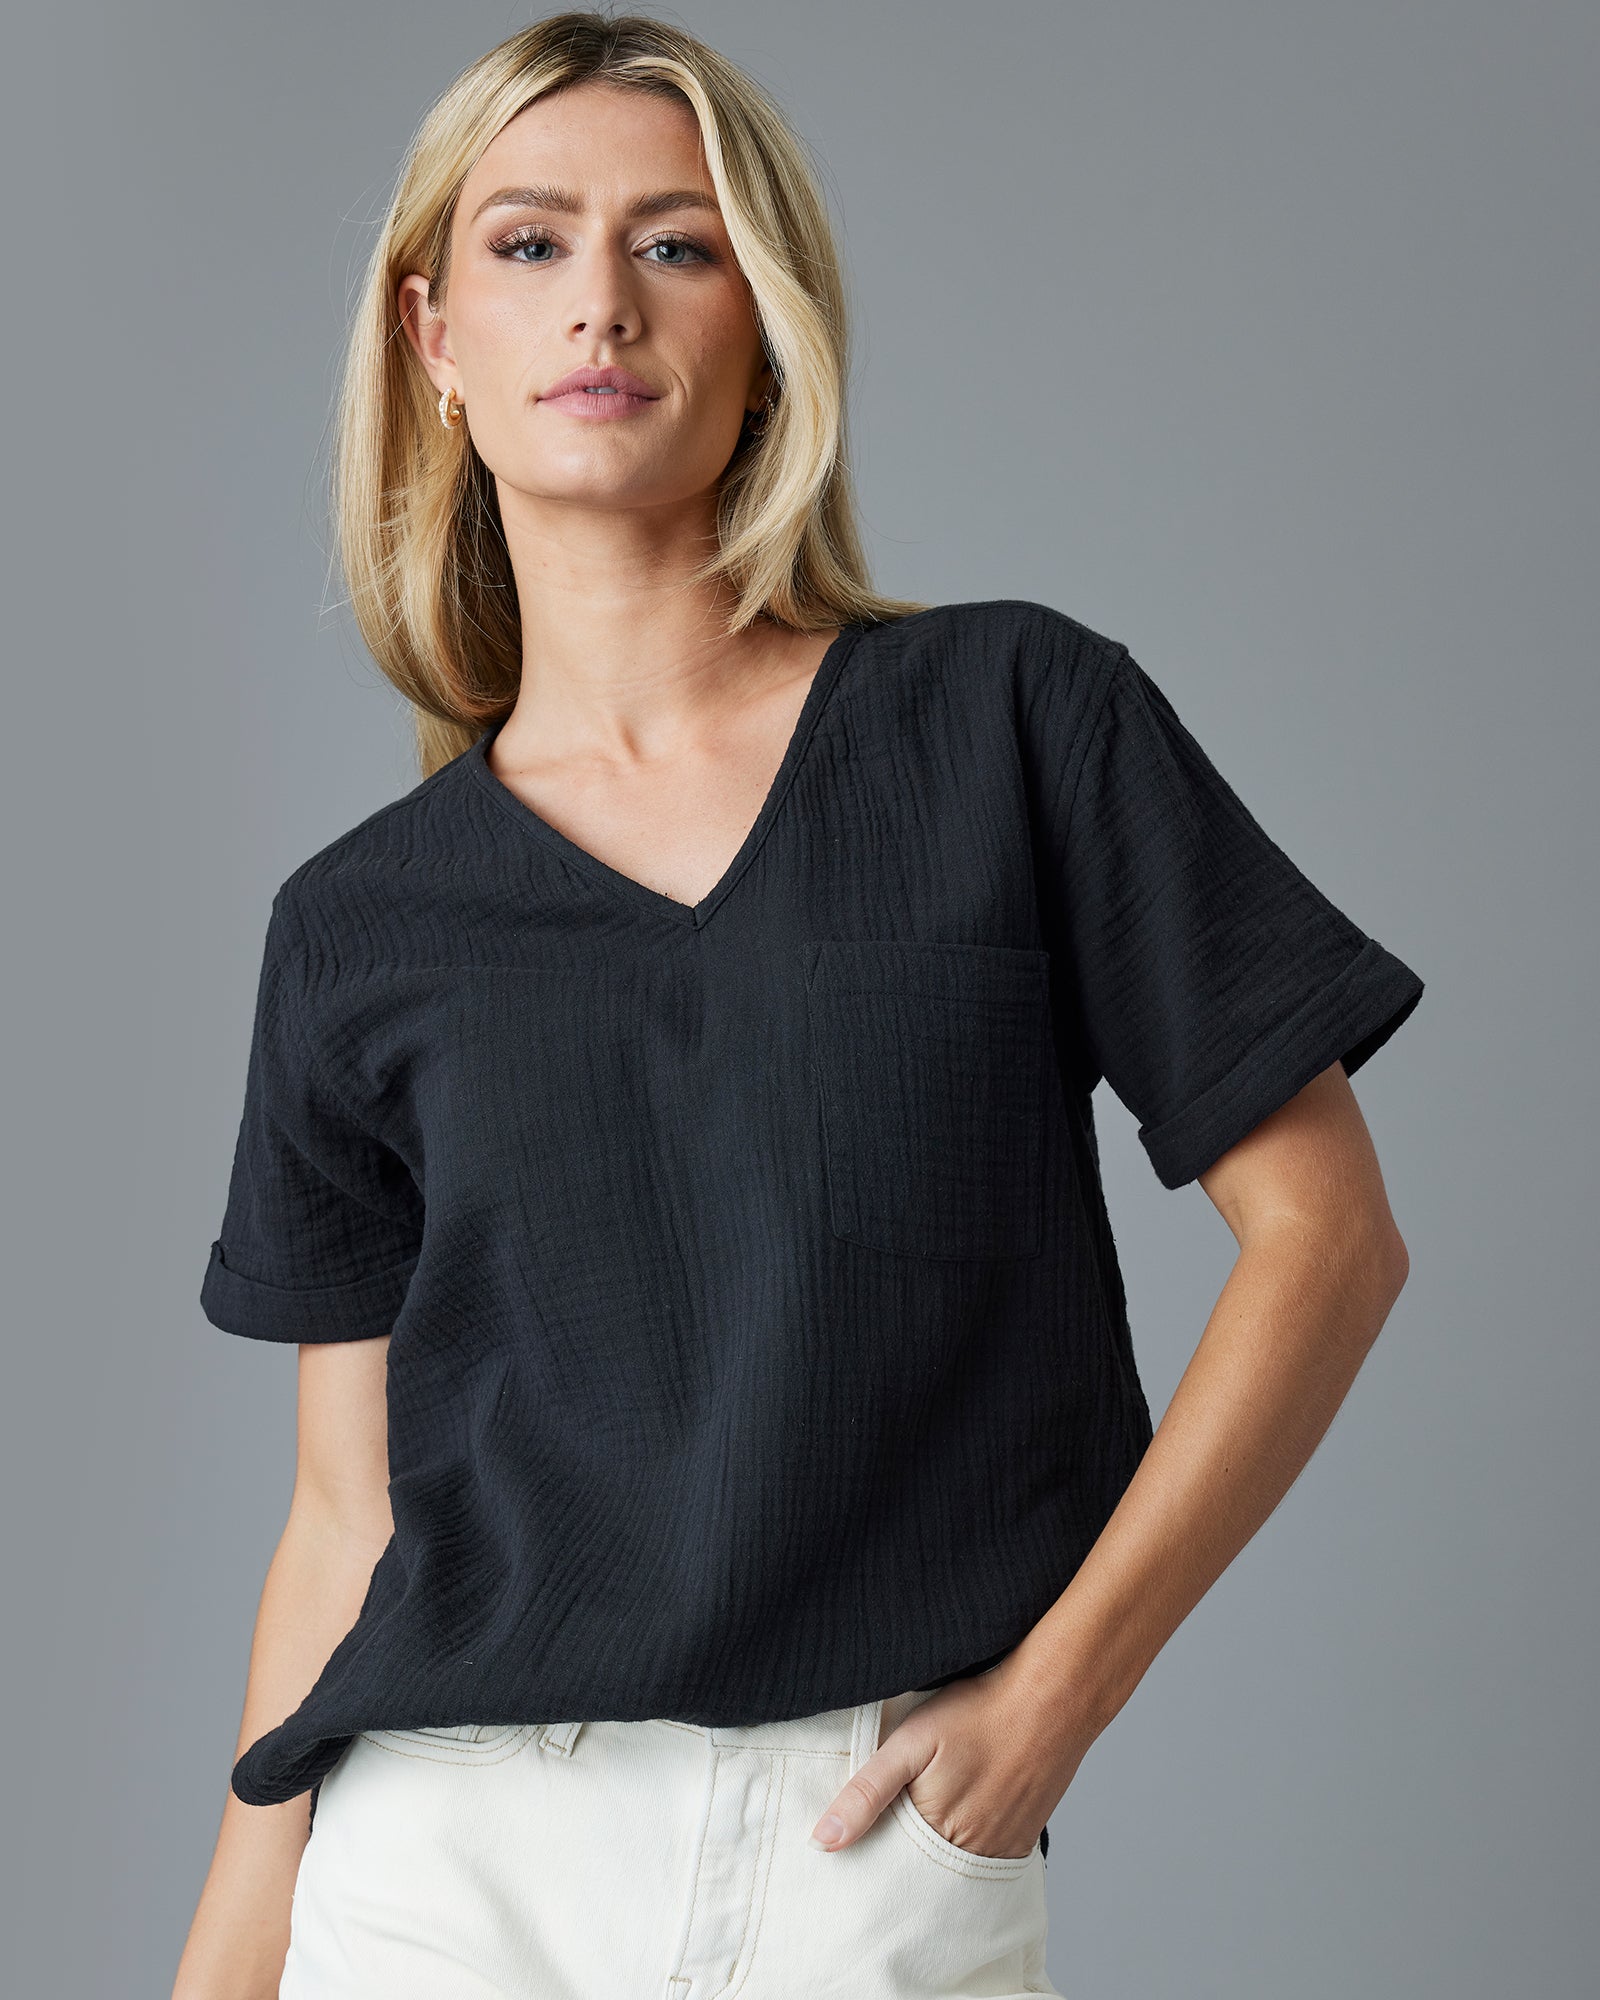 Woman in a black, short sleeved, textured top